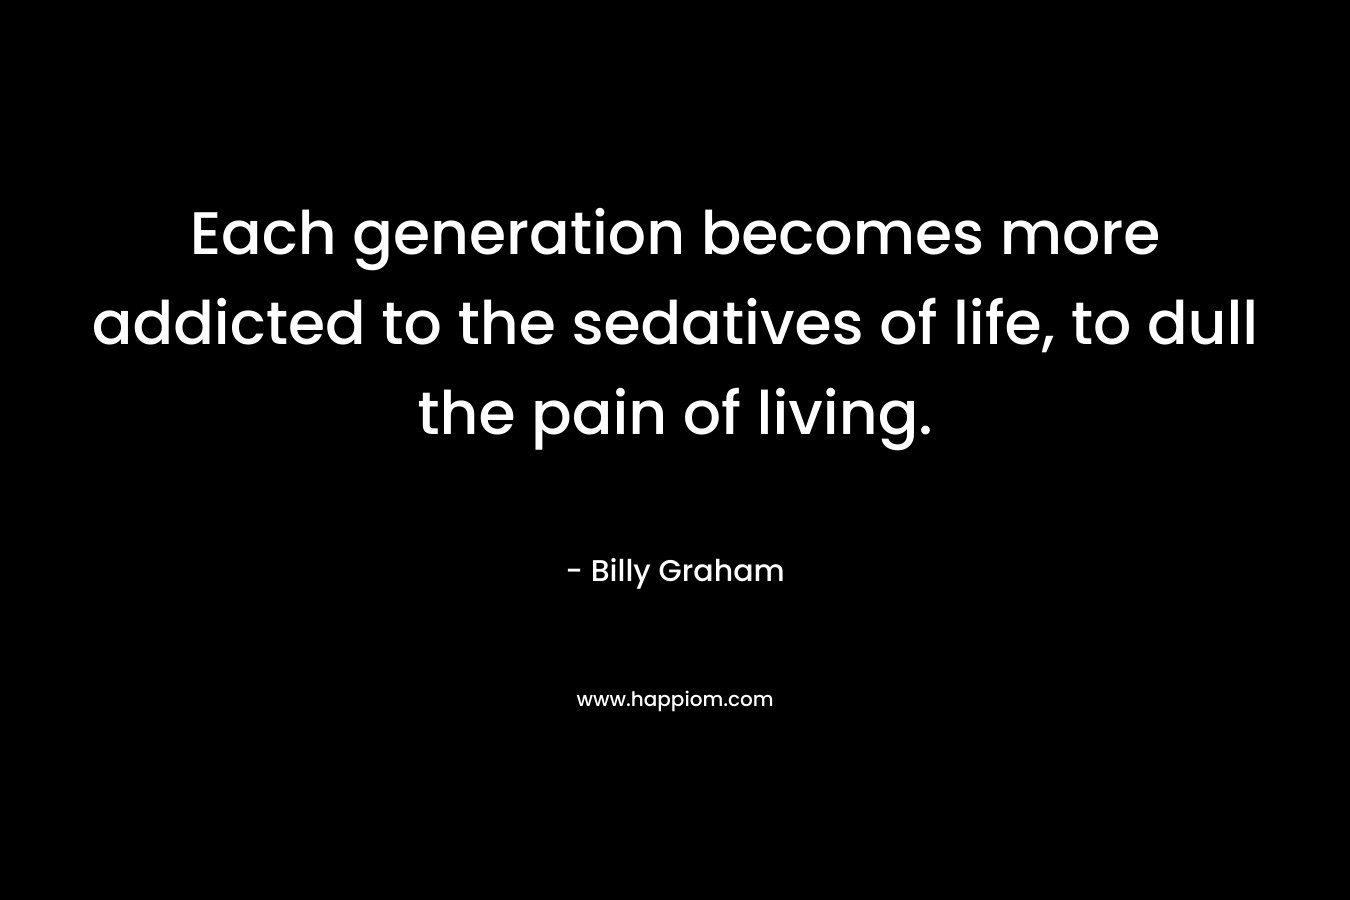 Each generation becomes more addicted to the sedatives of life, to dull the pain of living.